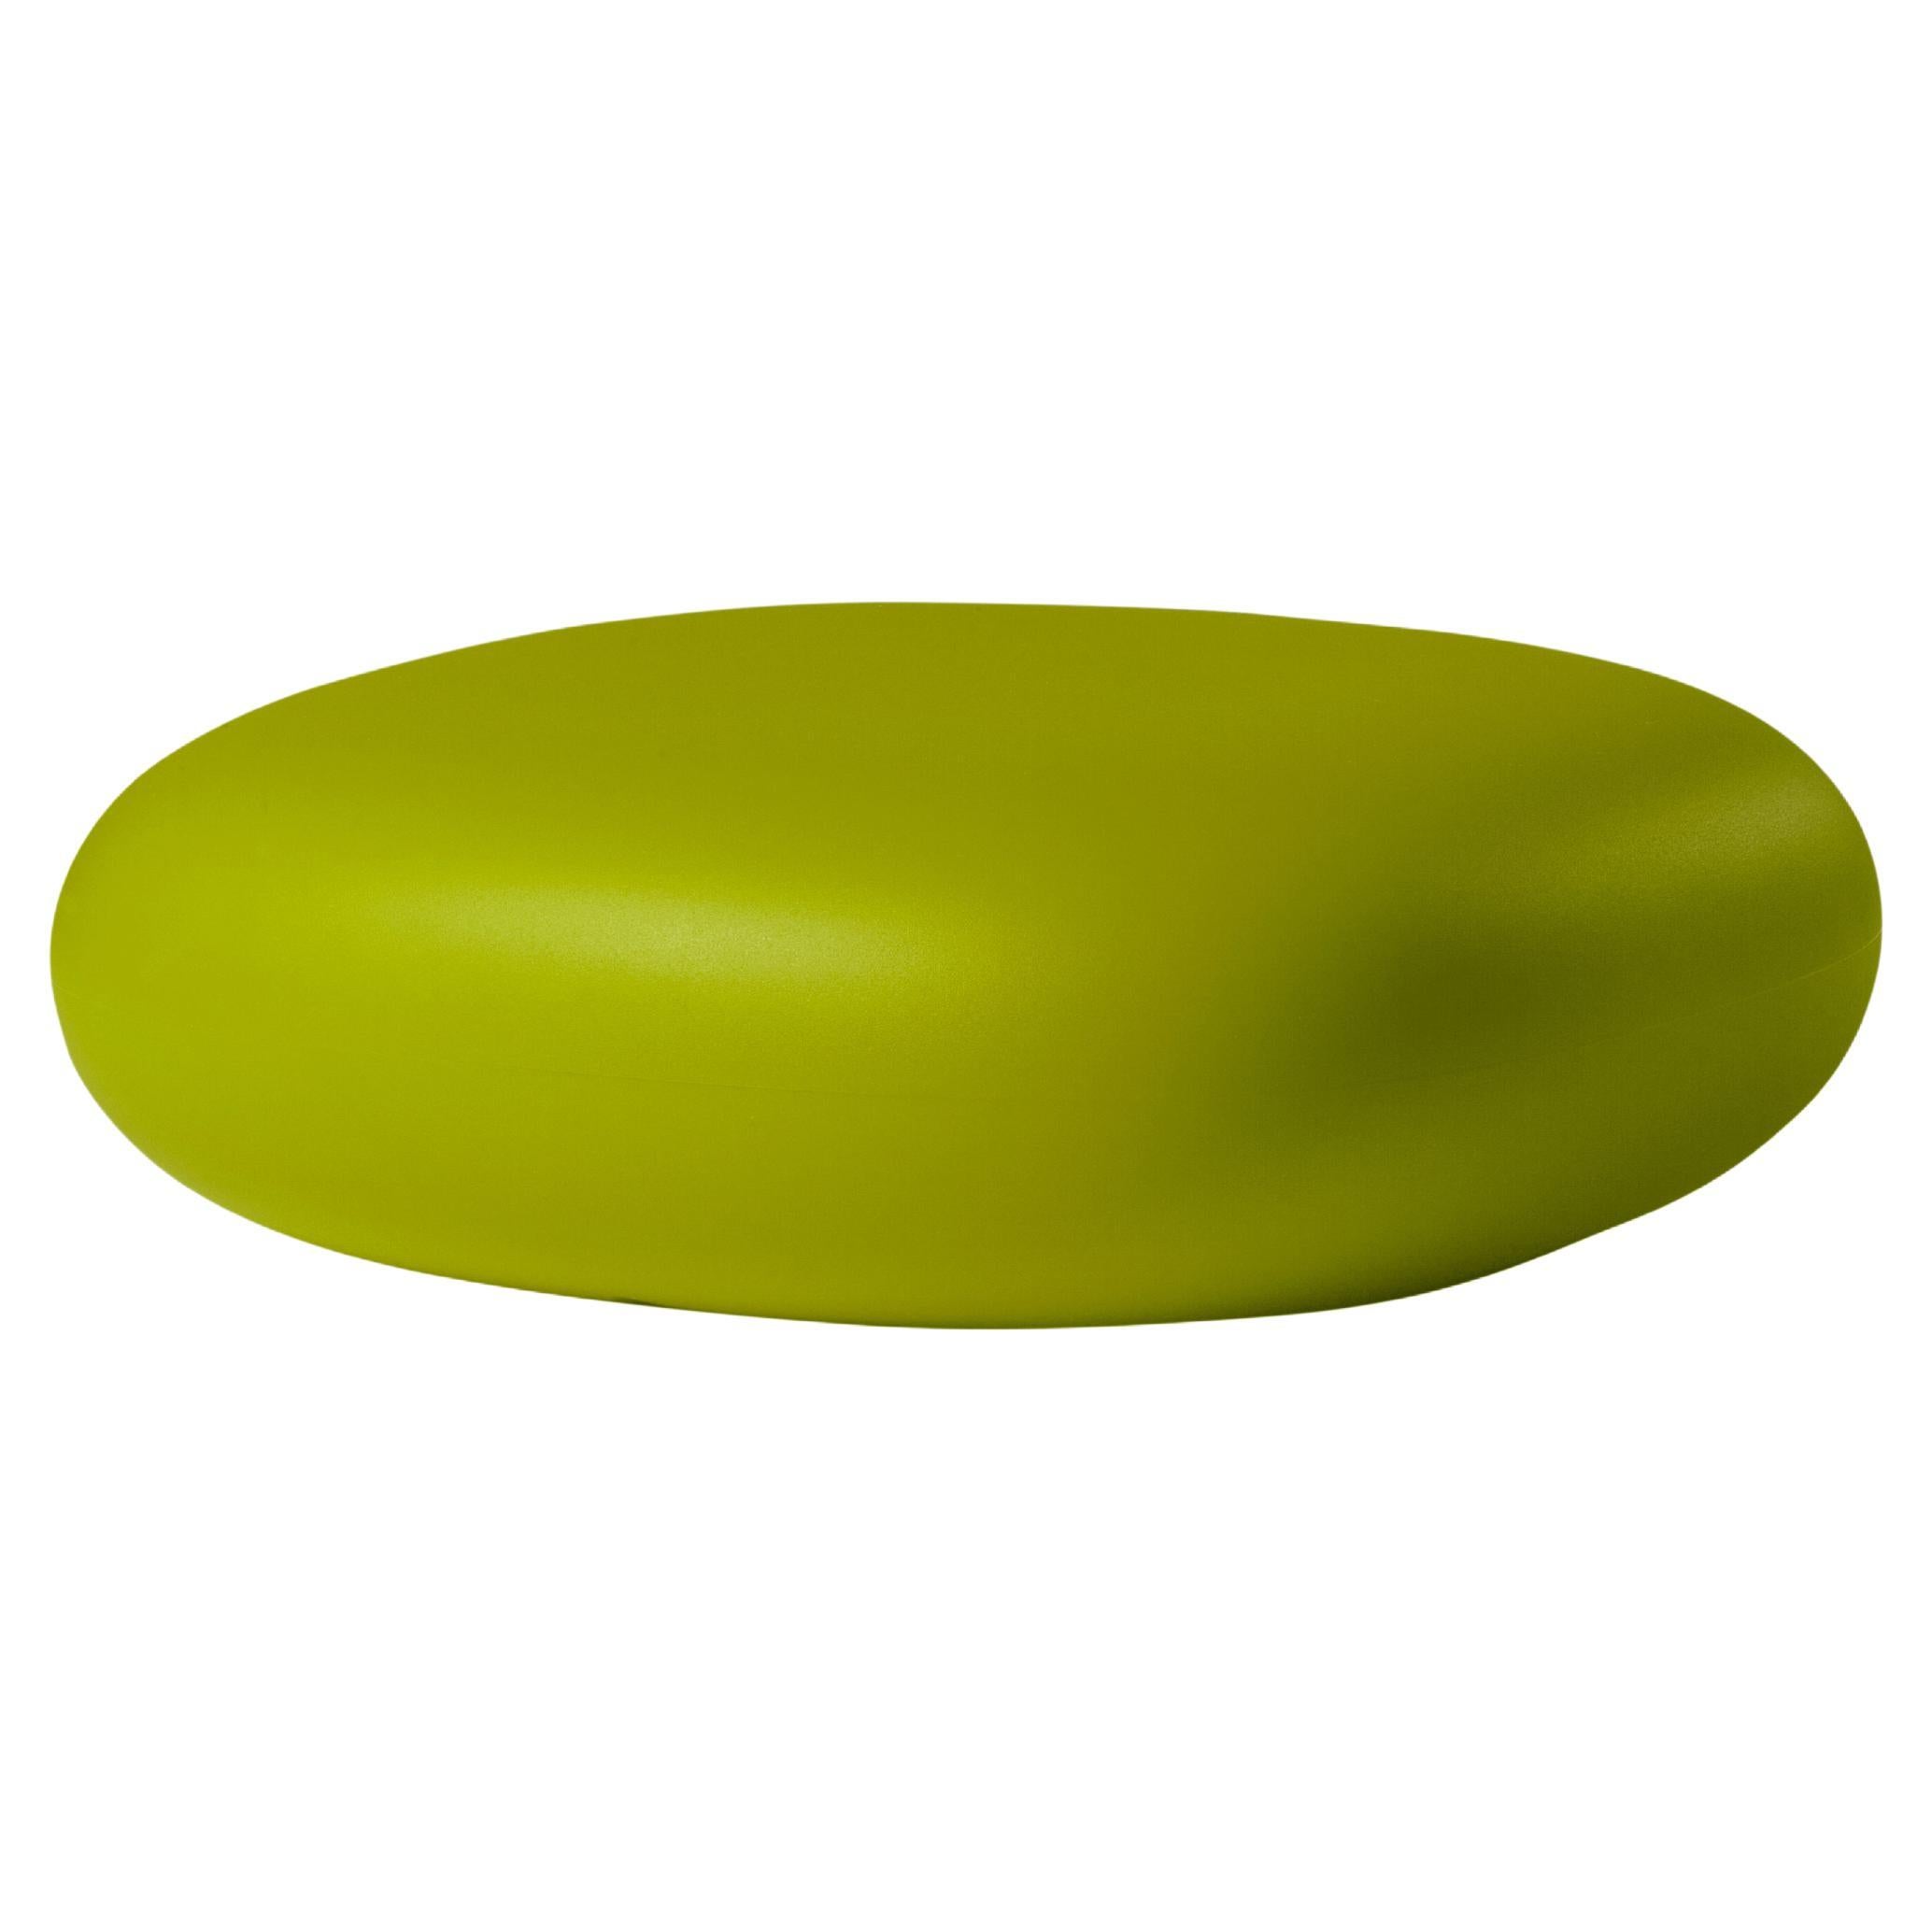 Slide Design Chubby Low Pouf in Lime Green by Marcel Wanders For Sale